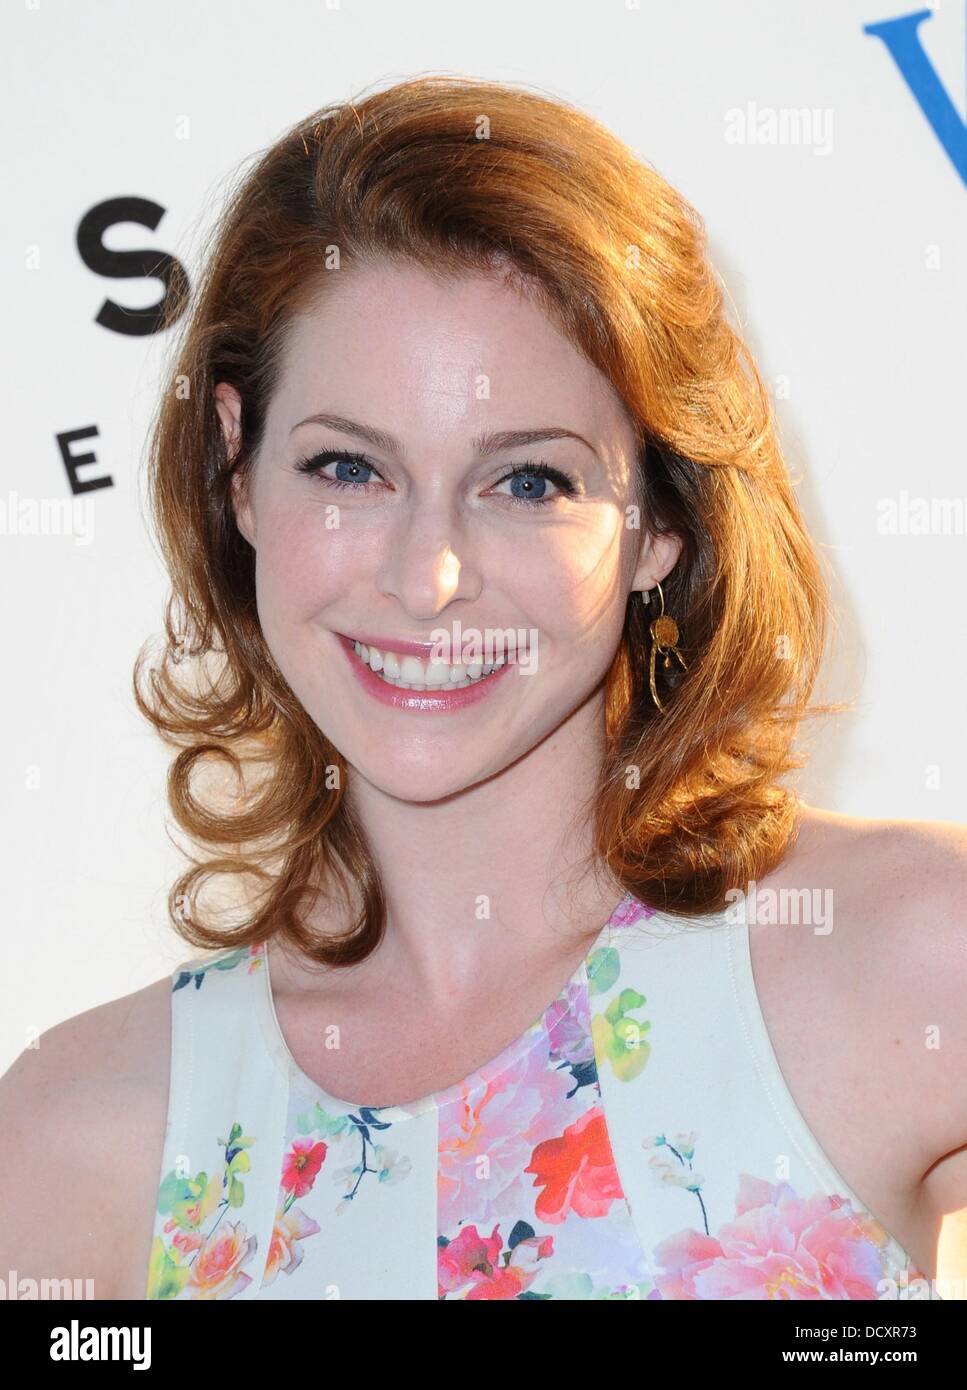 Los Angeles, CA. 21st Aug, 2013. Esme Bianco at arrivals for THE WORLD'S END Premiere, ArcLight Cinemas' Cinerama Dome, Los Angeles, CA August 21, 2013. Credit:  Dee Cercone/Everett Collection/Alamy Live News Stock Photo